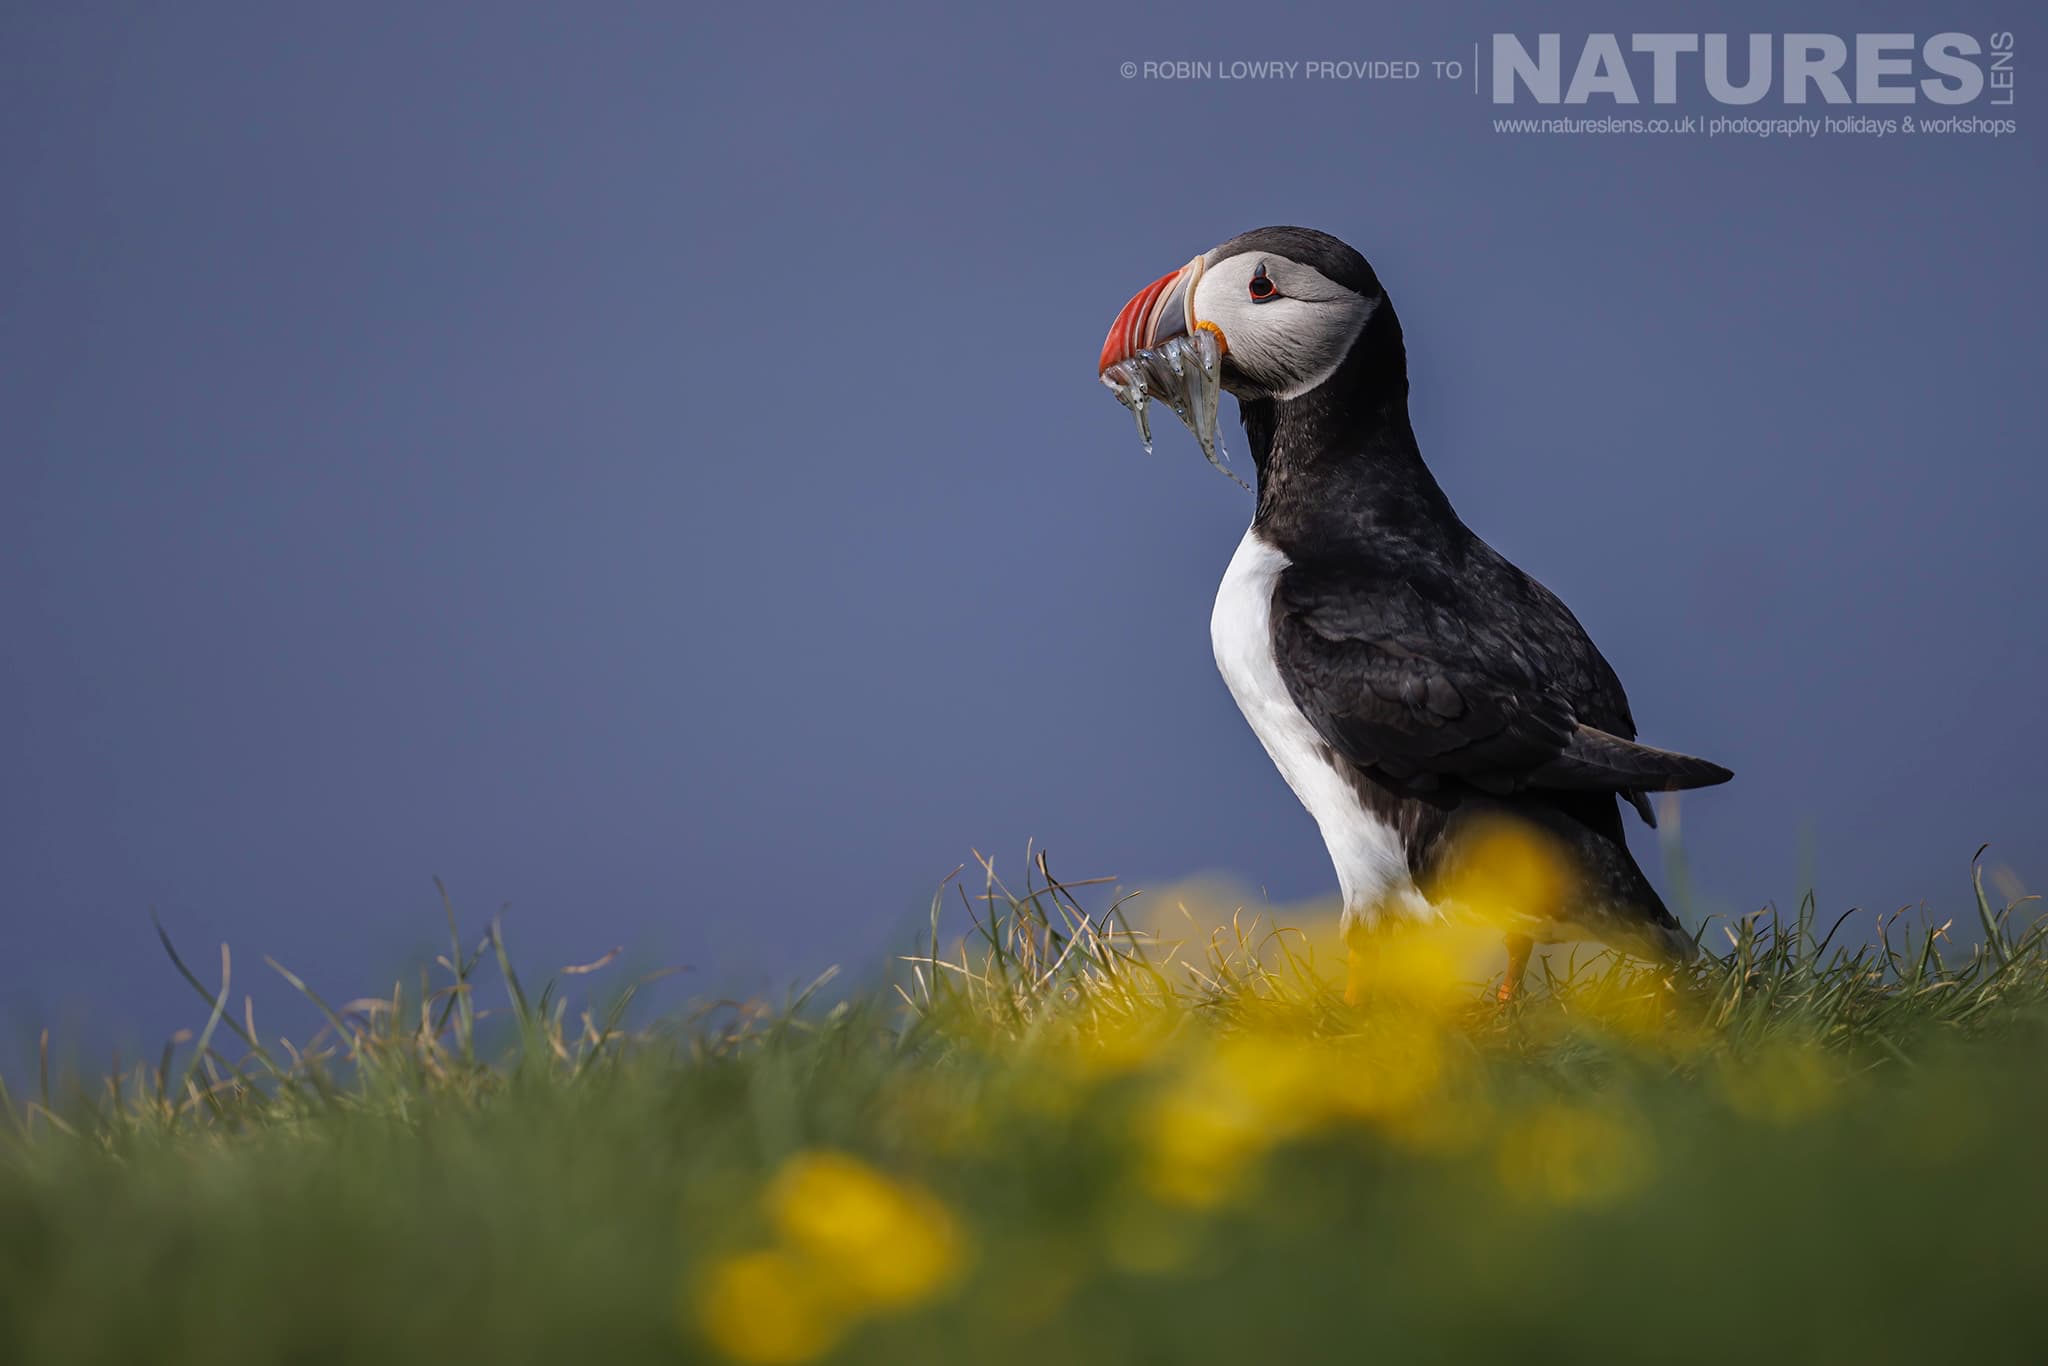 The Iconic Image Of A Lone Puffin With A Beak Full Of Sandeels On The Atlantic Puffin Colony Of Grímsey Island